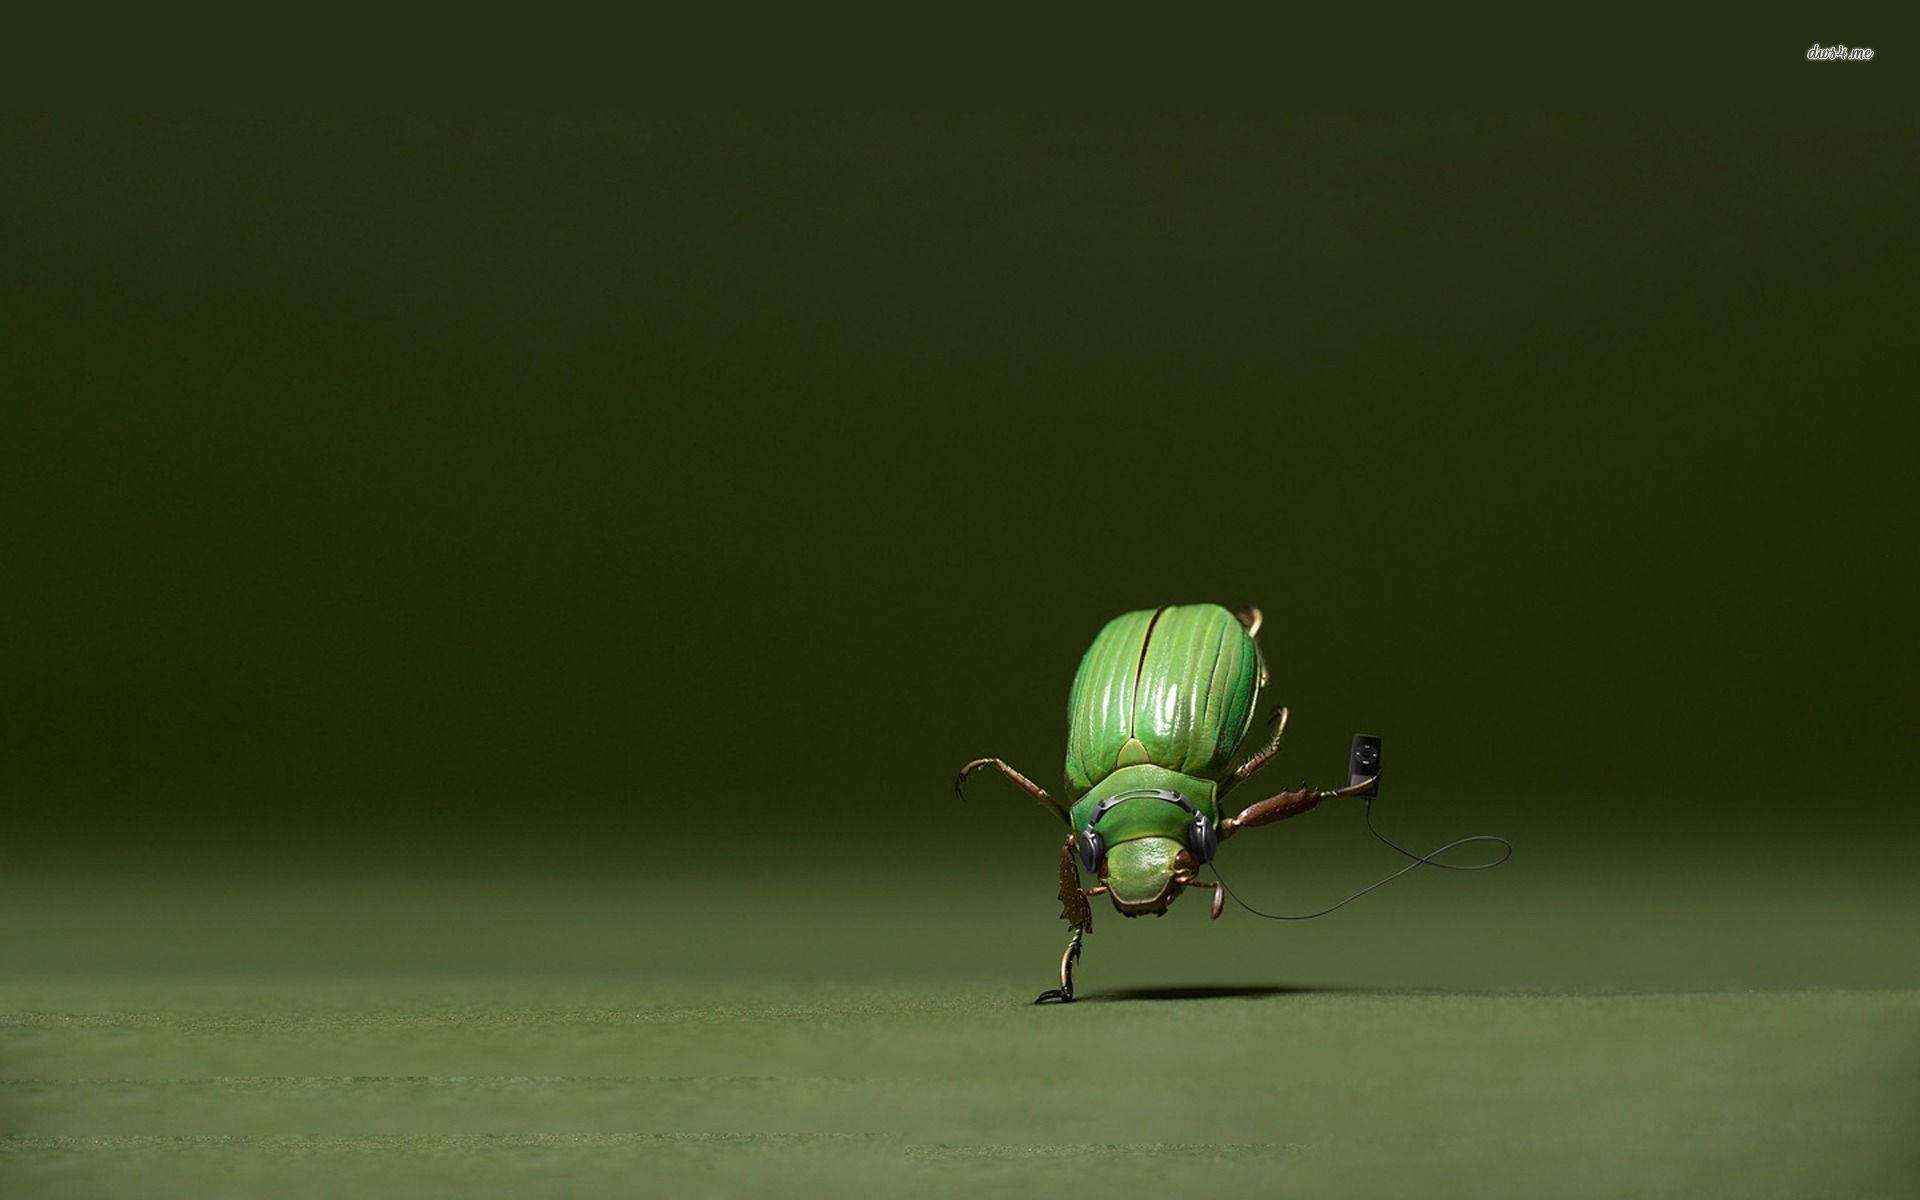 Insect In A Handstand